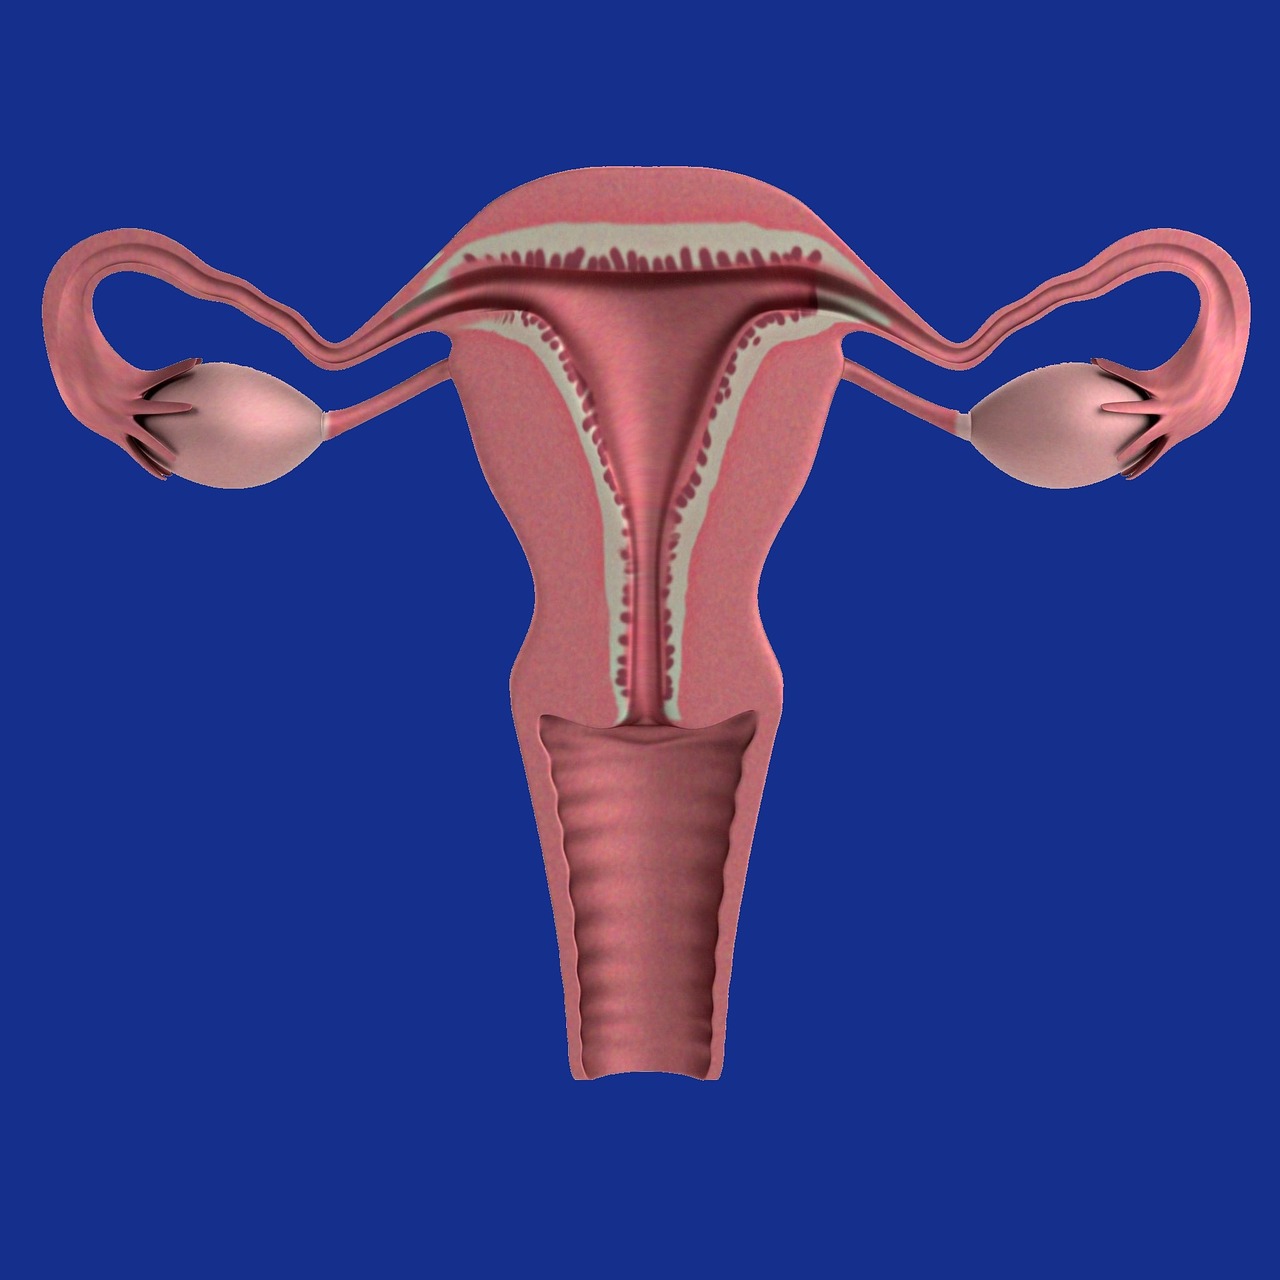 HSG vs SIS: Comparing Female Reproductive Tests